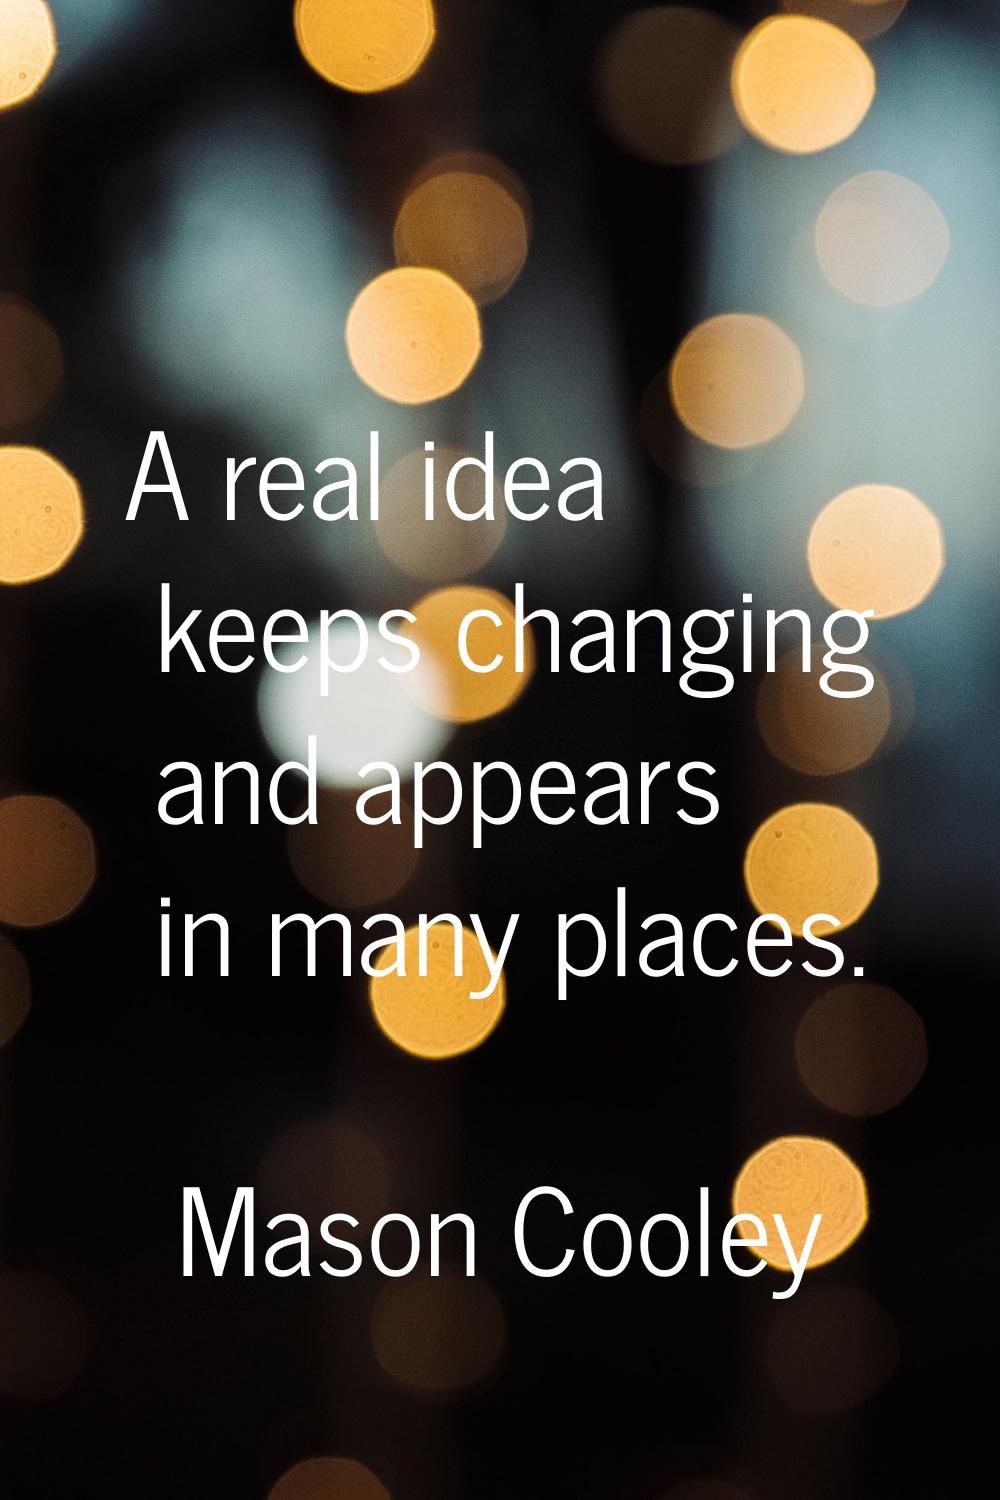 A real idea keeps changing and appears in many places.